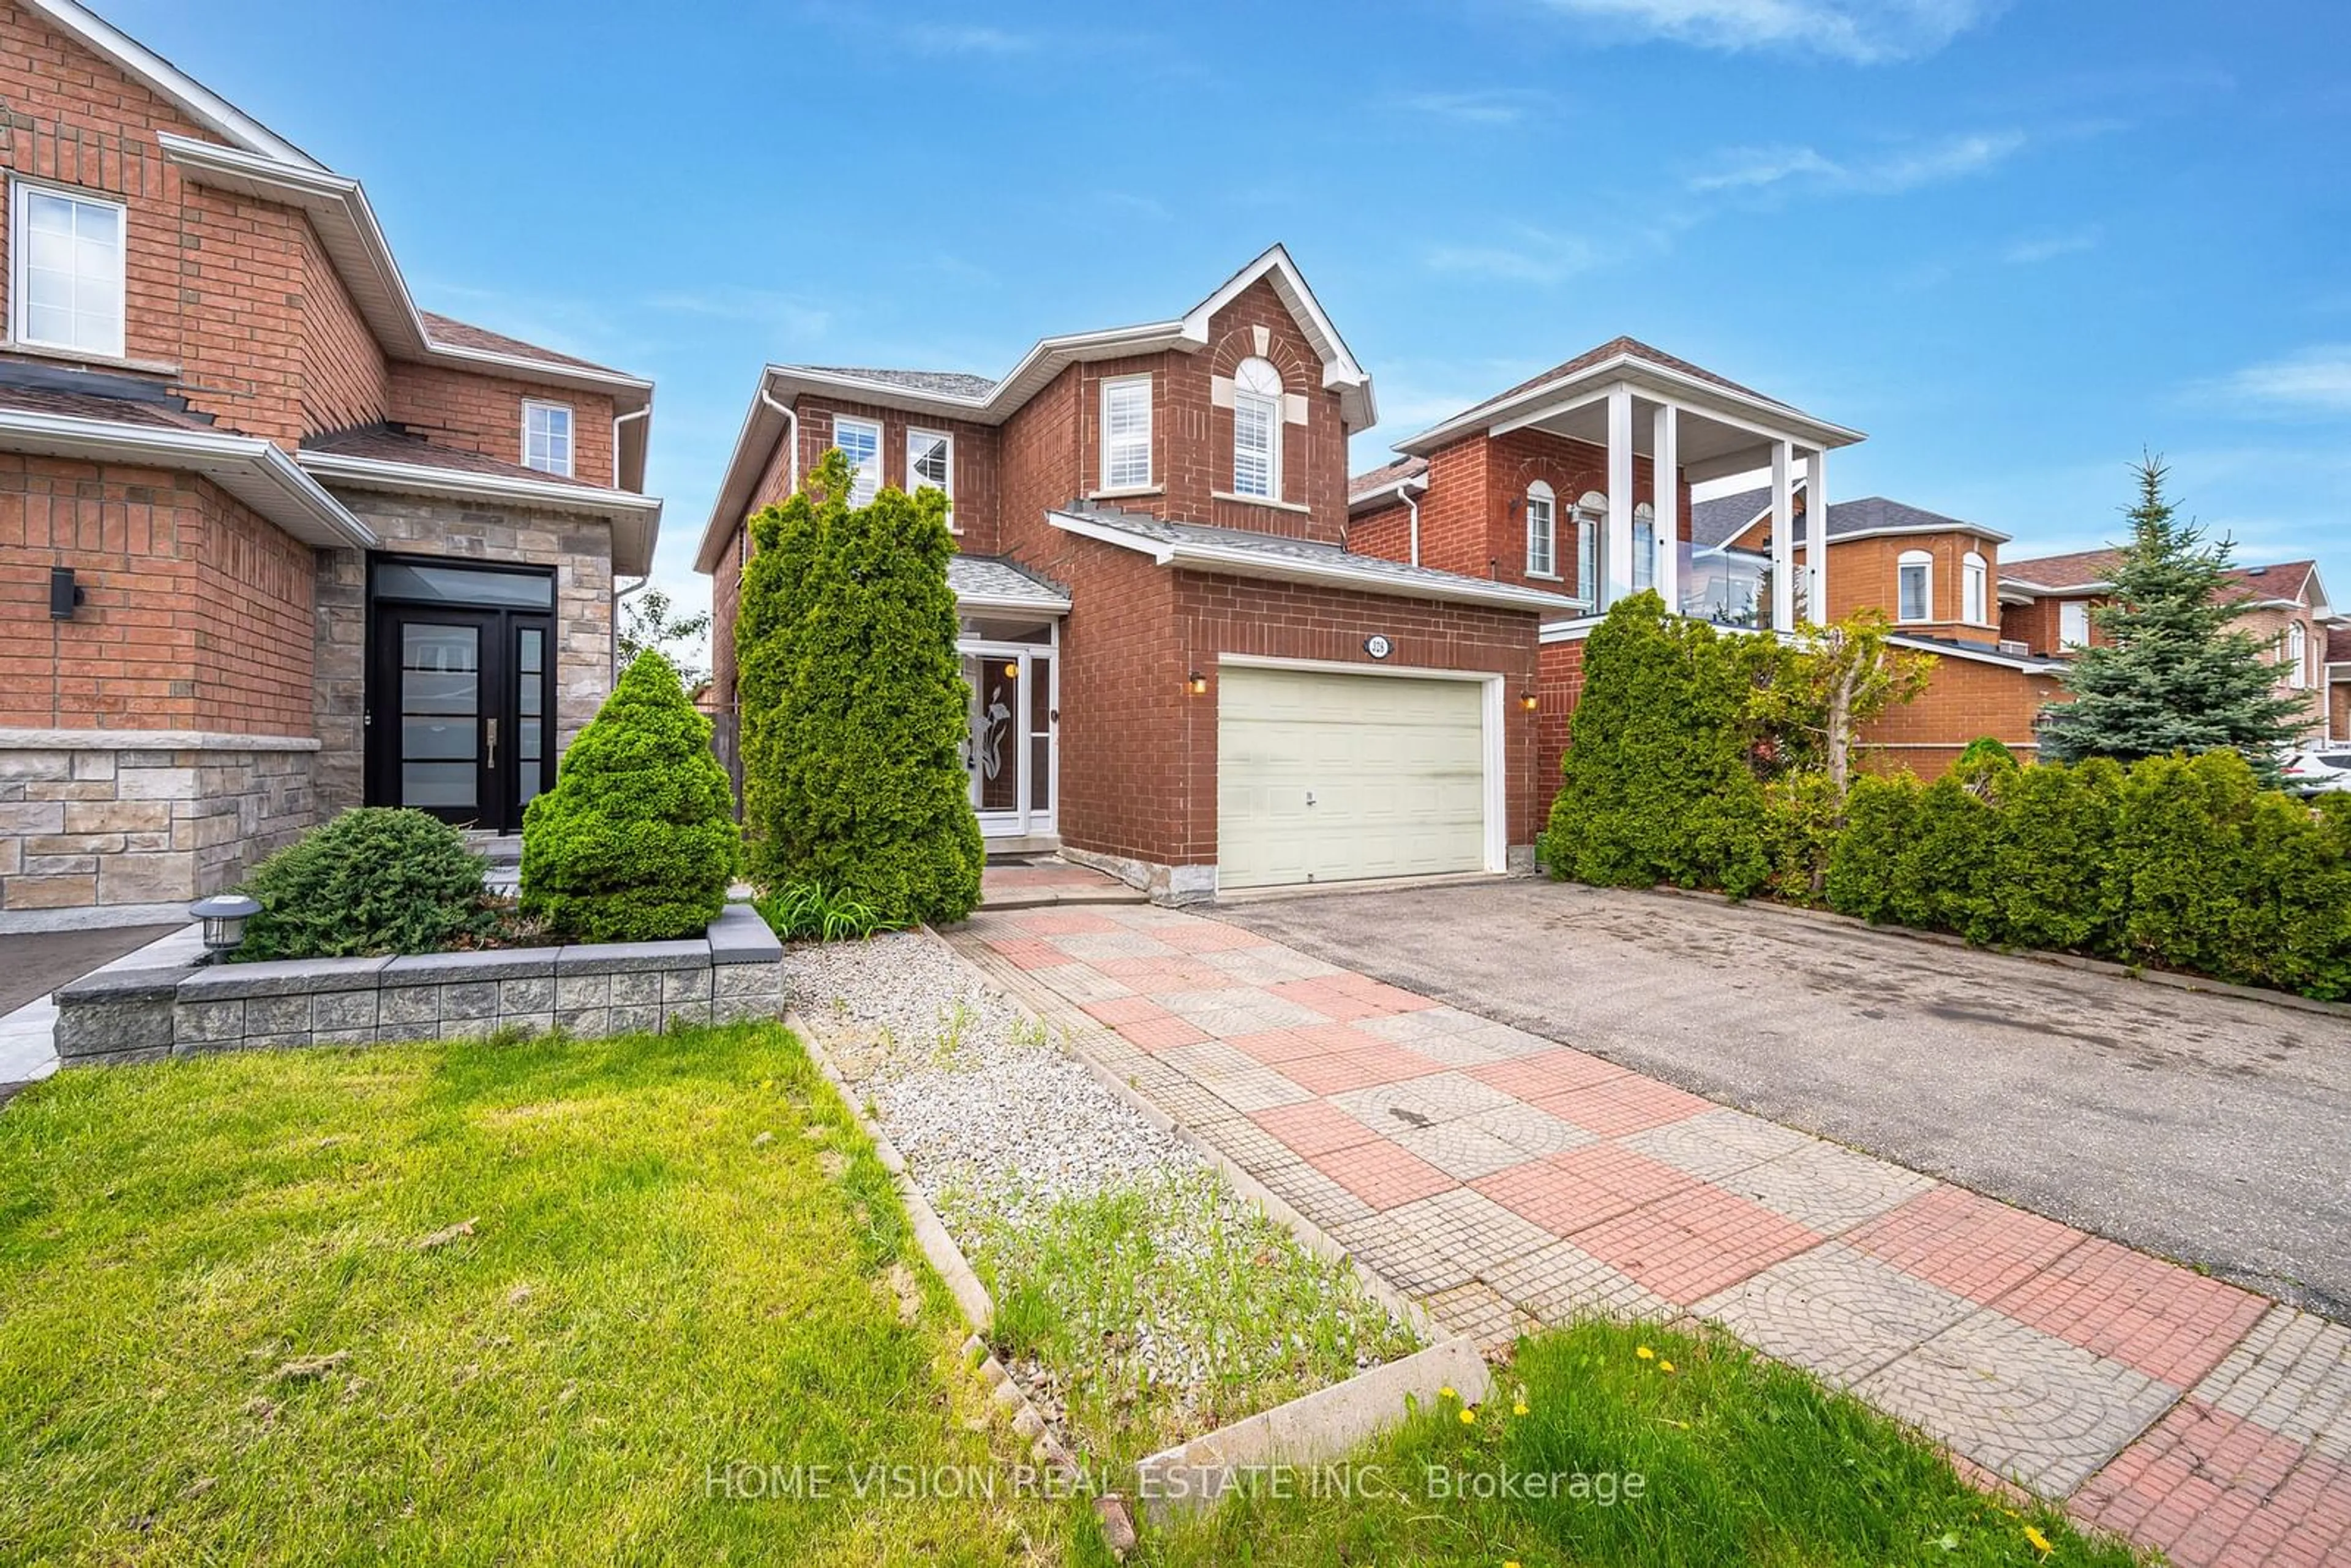 Home with brick exterior material for 328 St. Joan Of Arc Ave, Vaughan Ontario L6A 3N1